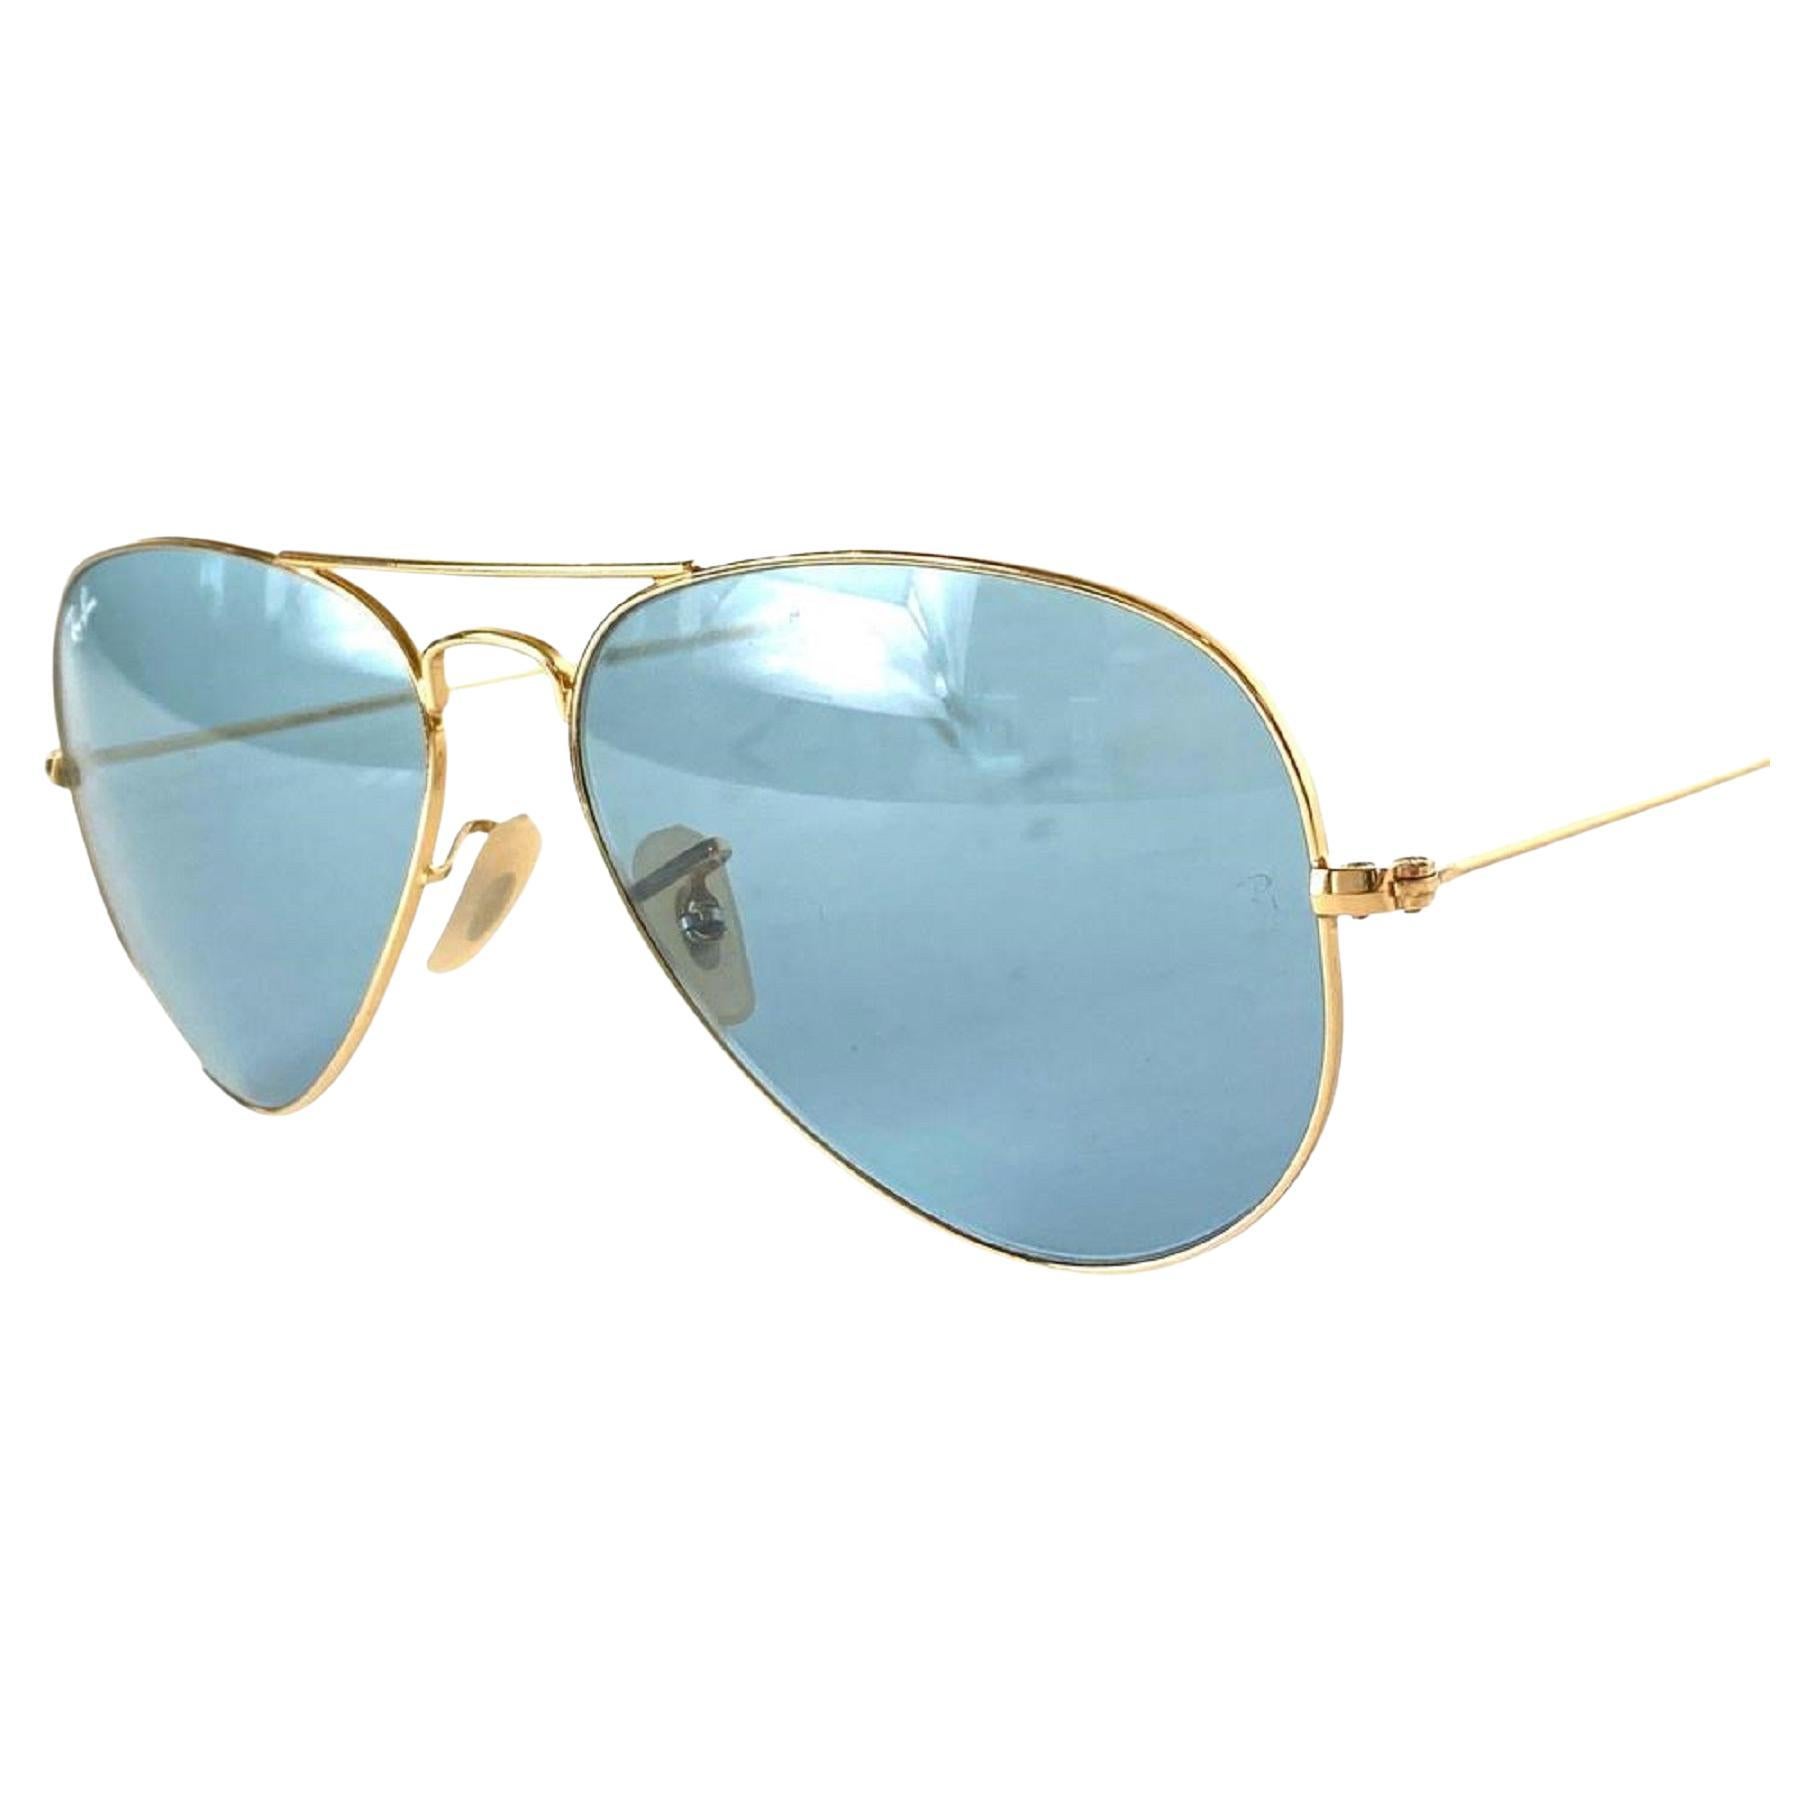 Where can I find original Ray-Ban aviator glasses?